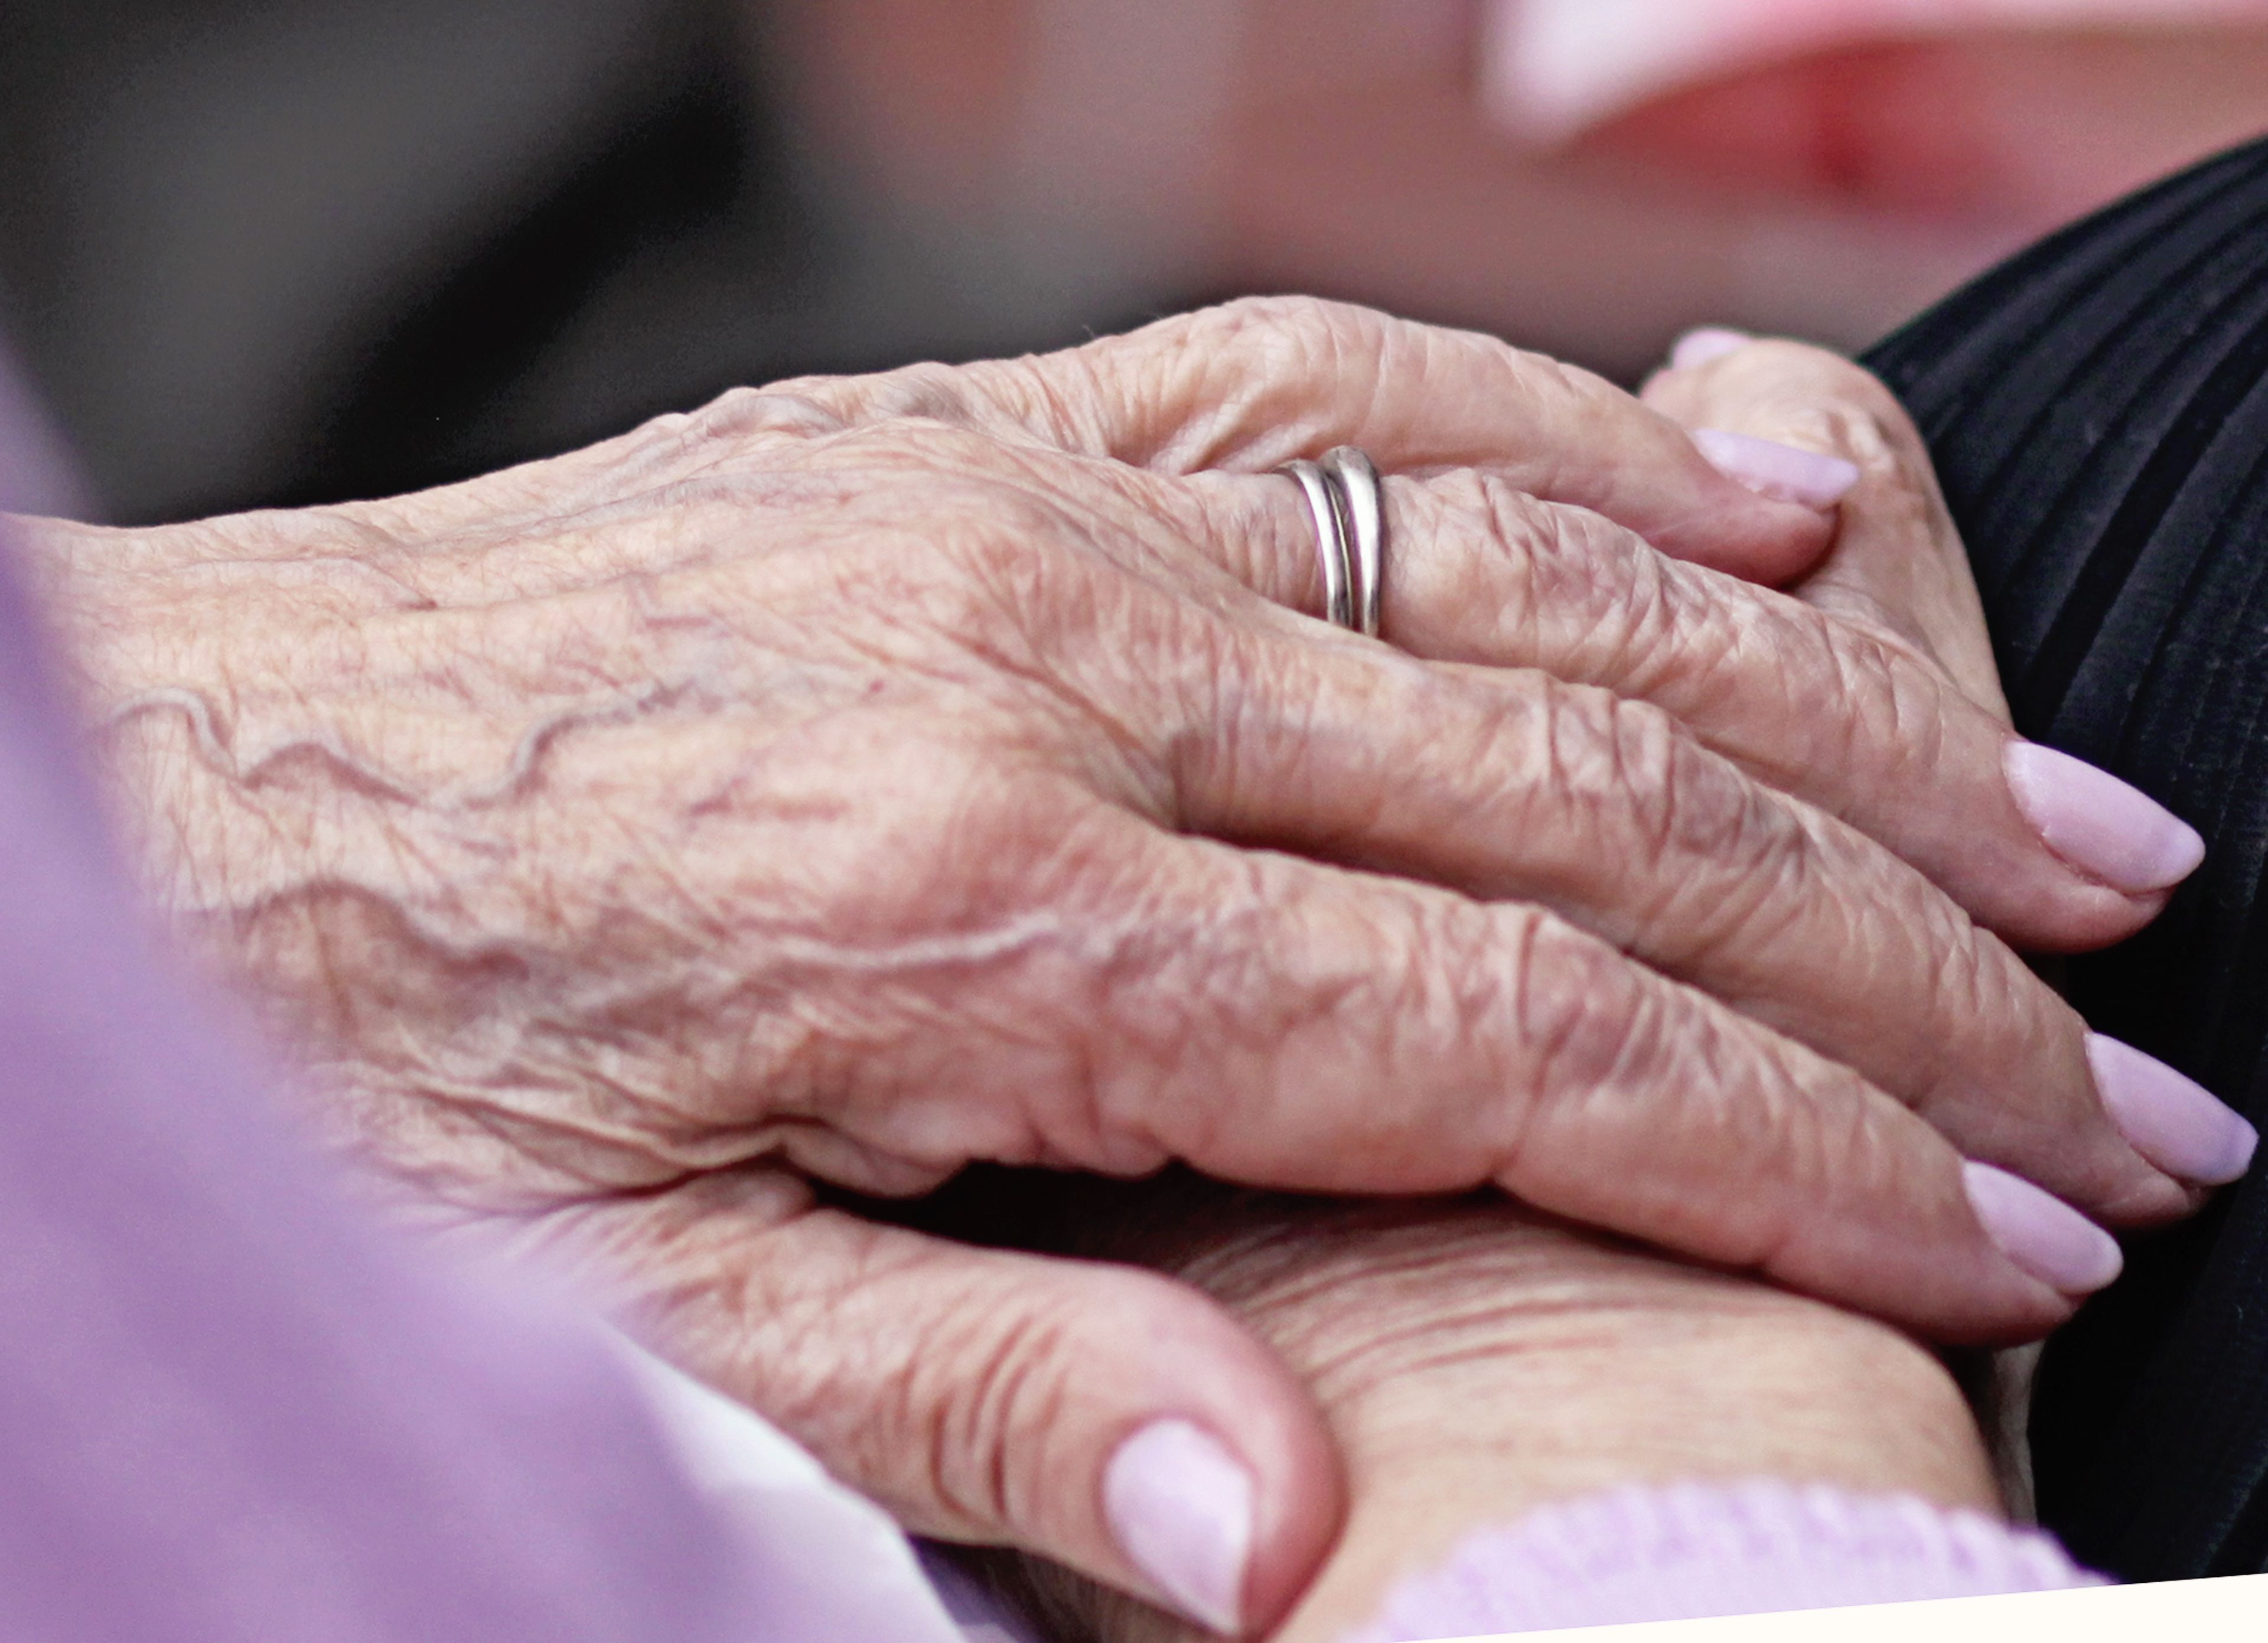 An elderly woman’s hand with a silver wedding band.